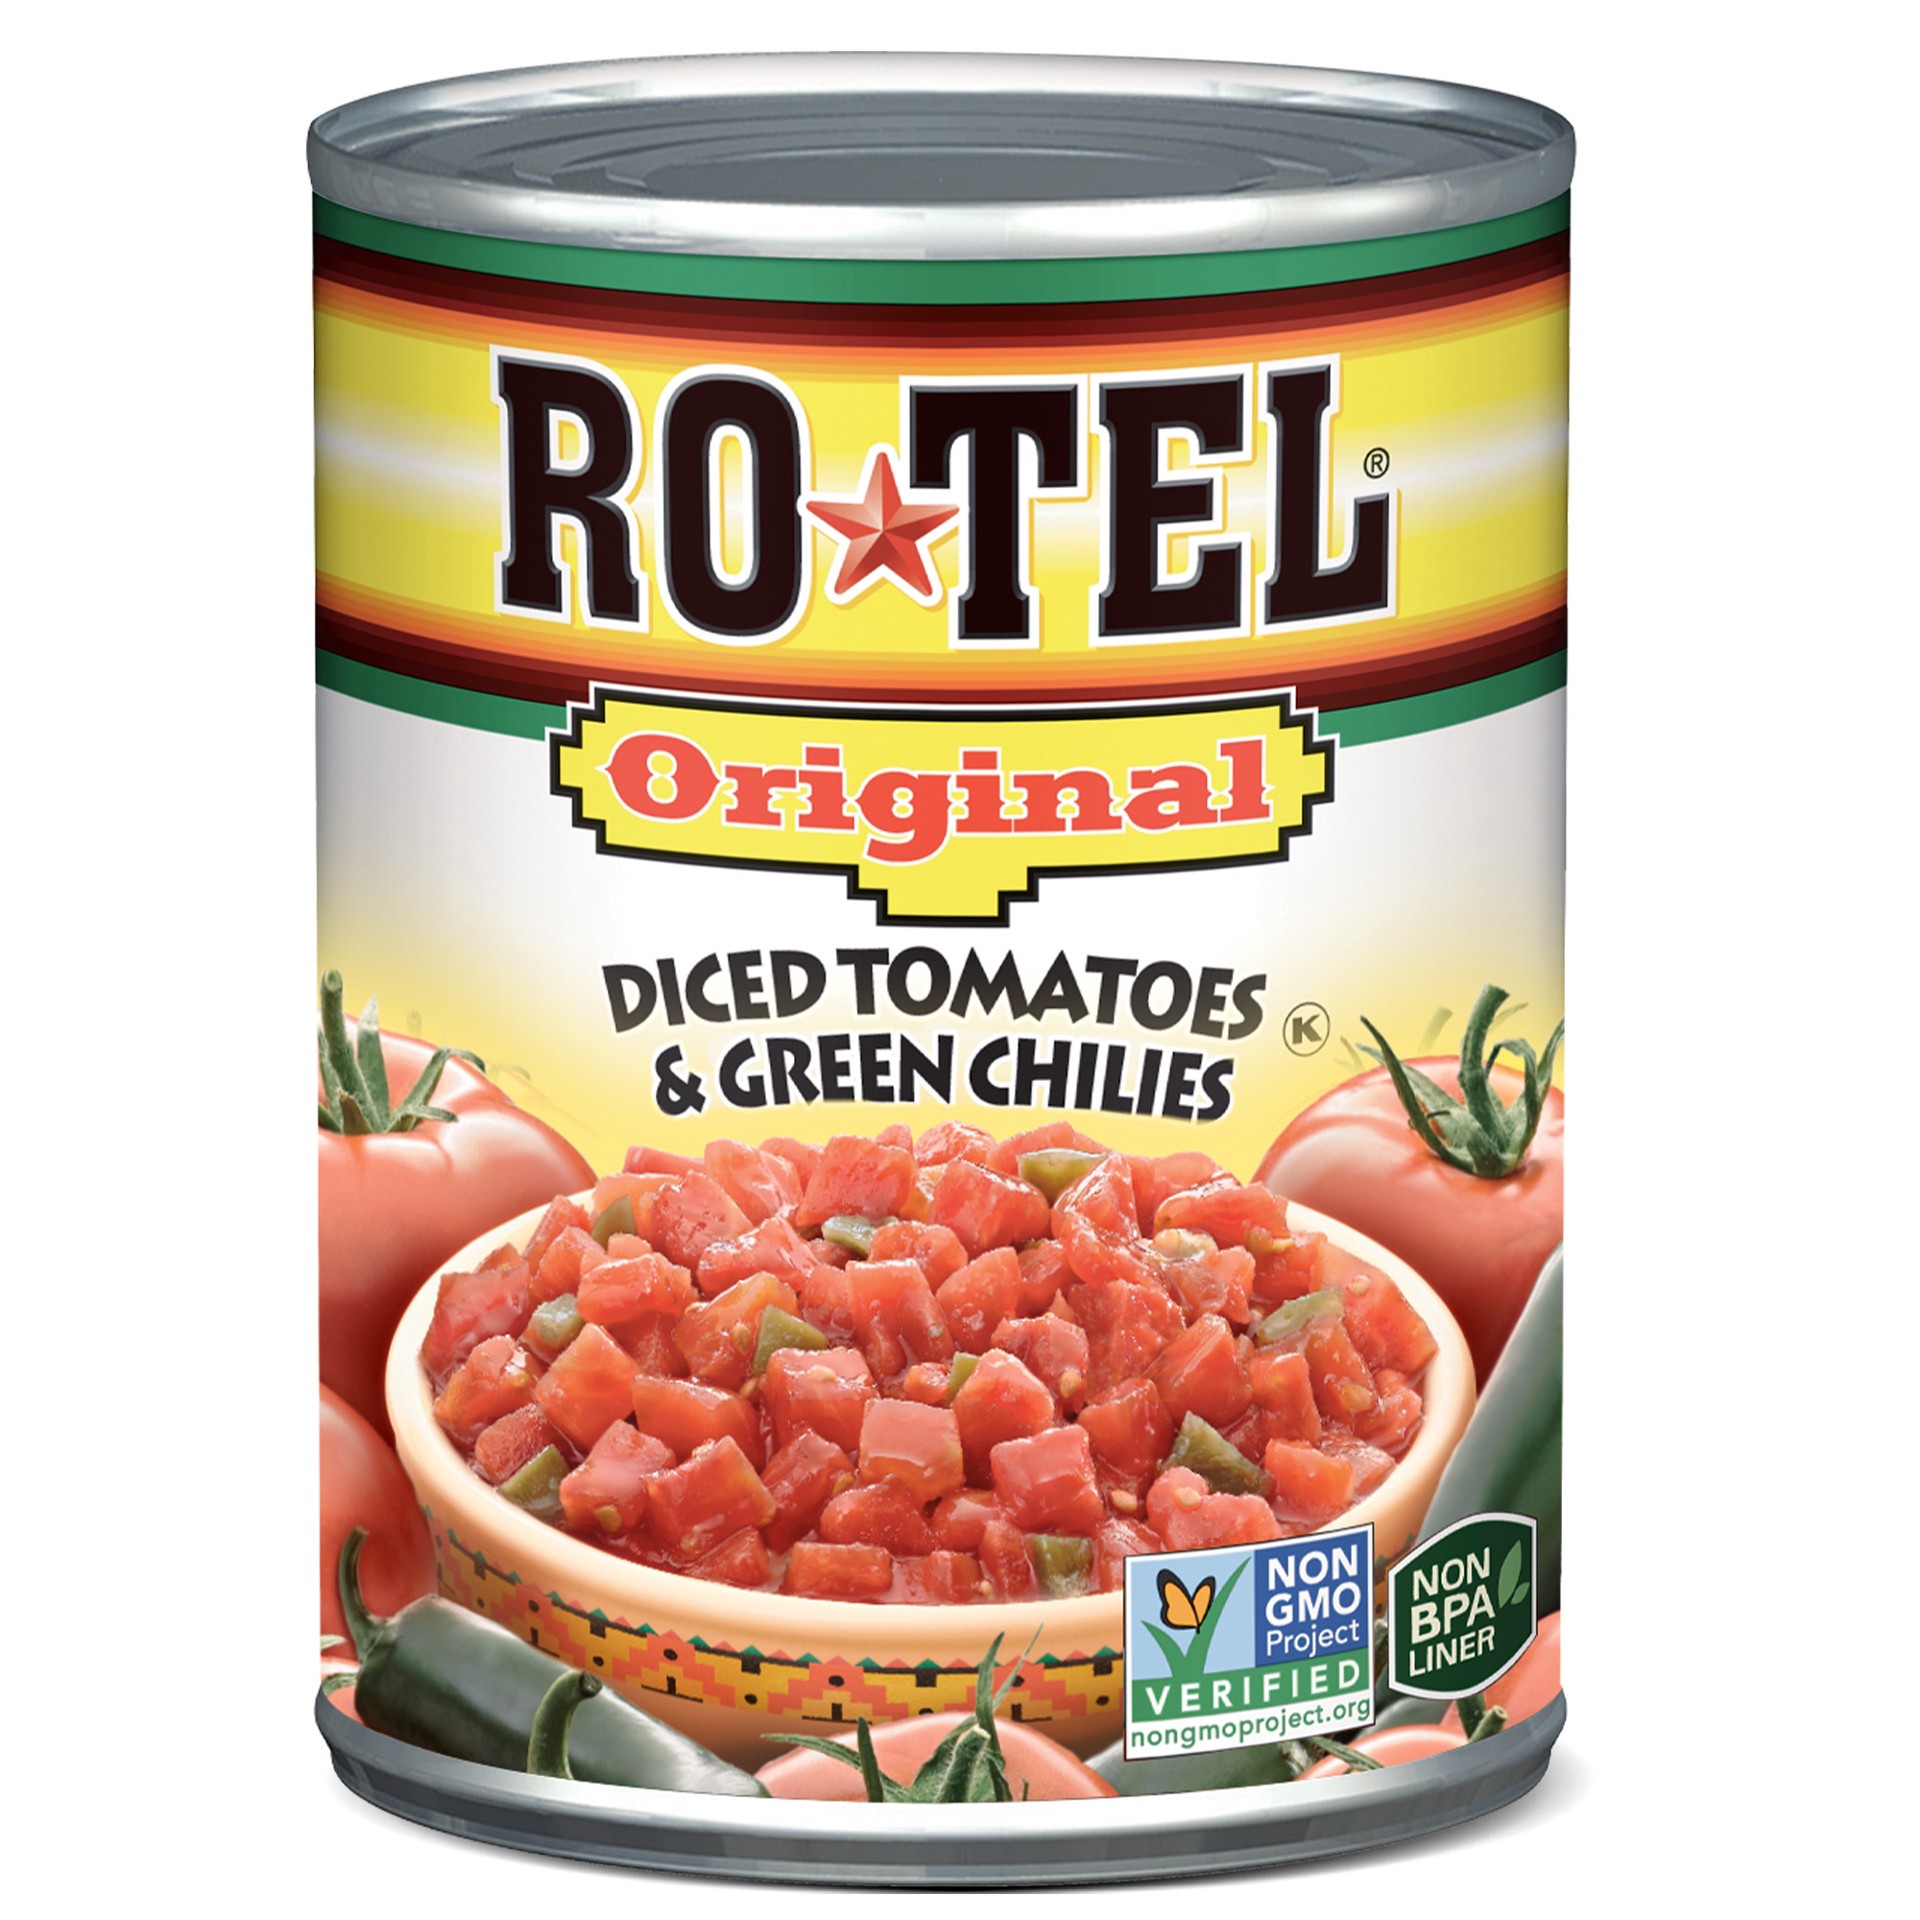 slide 1 of 5, Rotel Diced Original Tomatoes & Green Chilies 10 oz, 10 oz